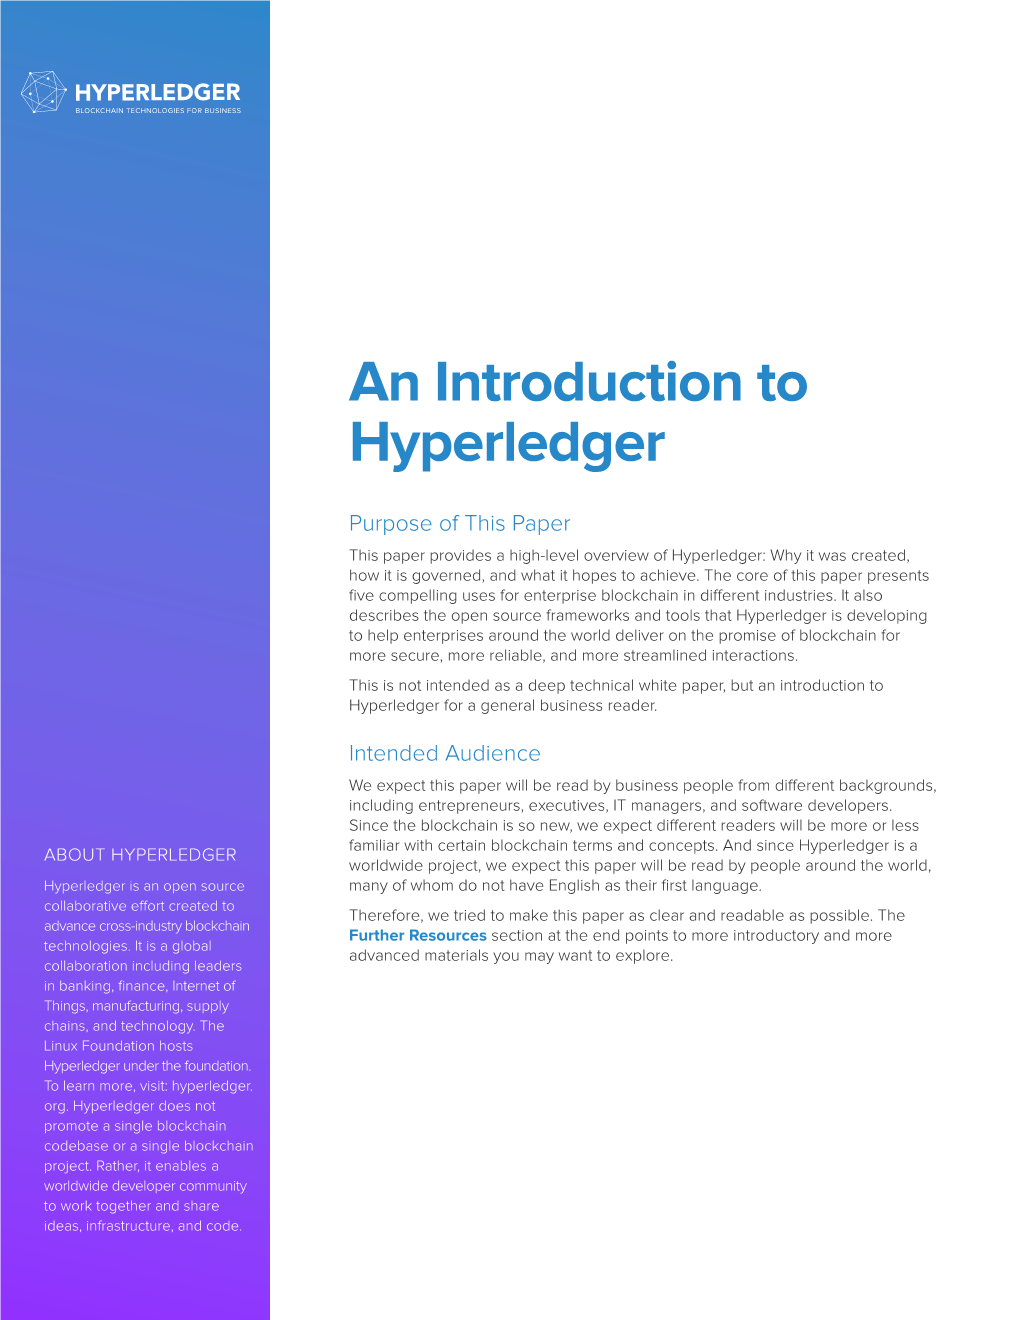 An Introduction to Hyperledger